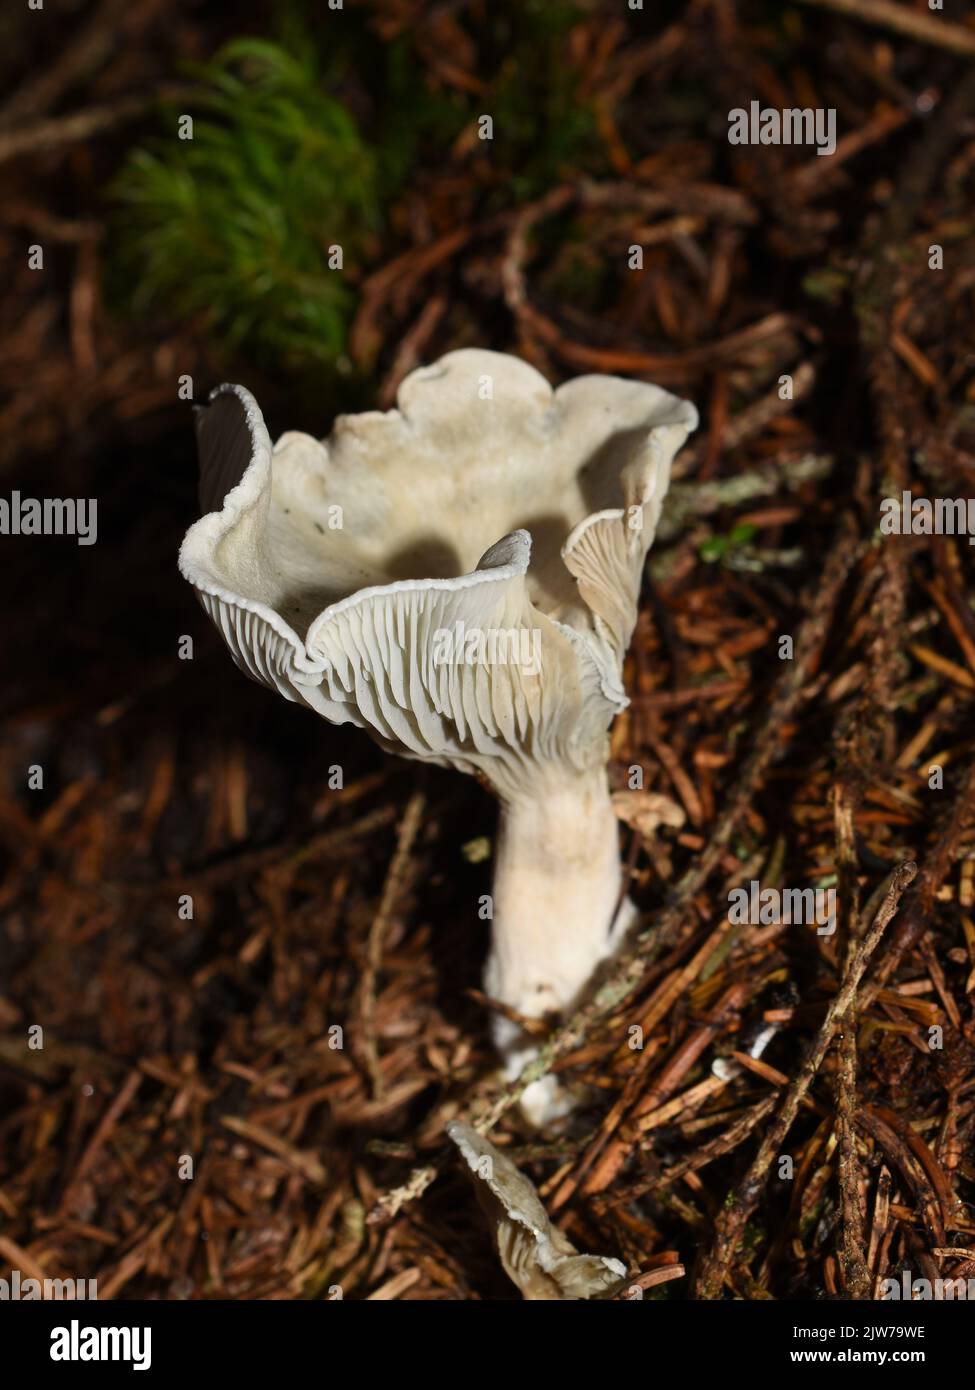 Green mushroom Aniseed toadstool Clitocybe odora in nature Stock Photo